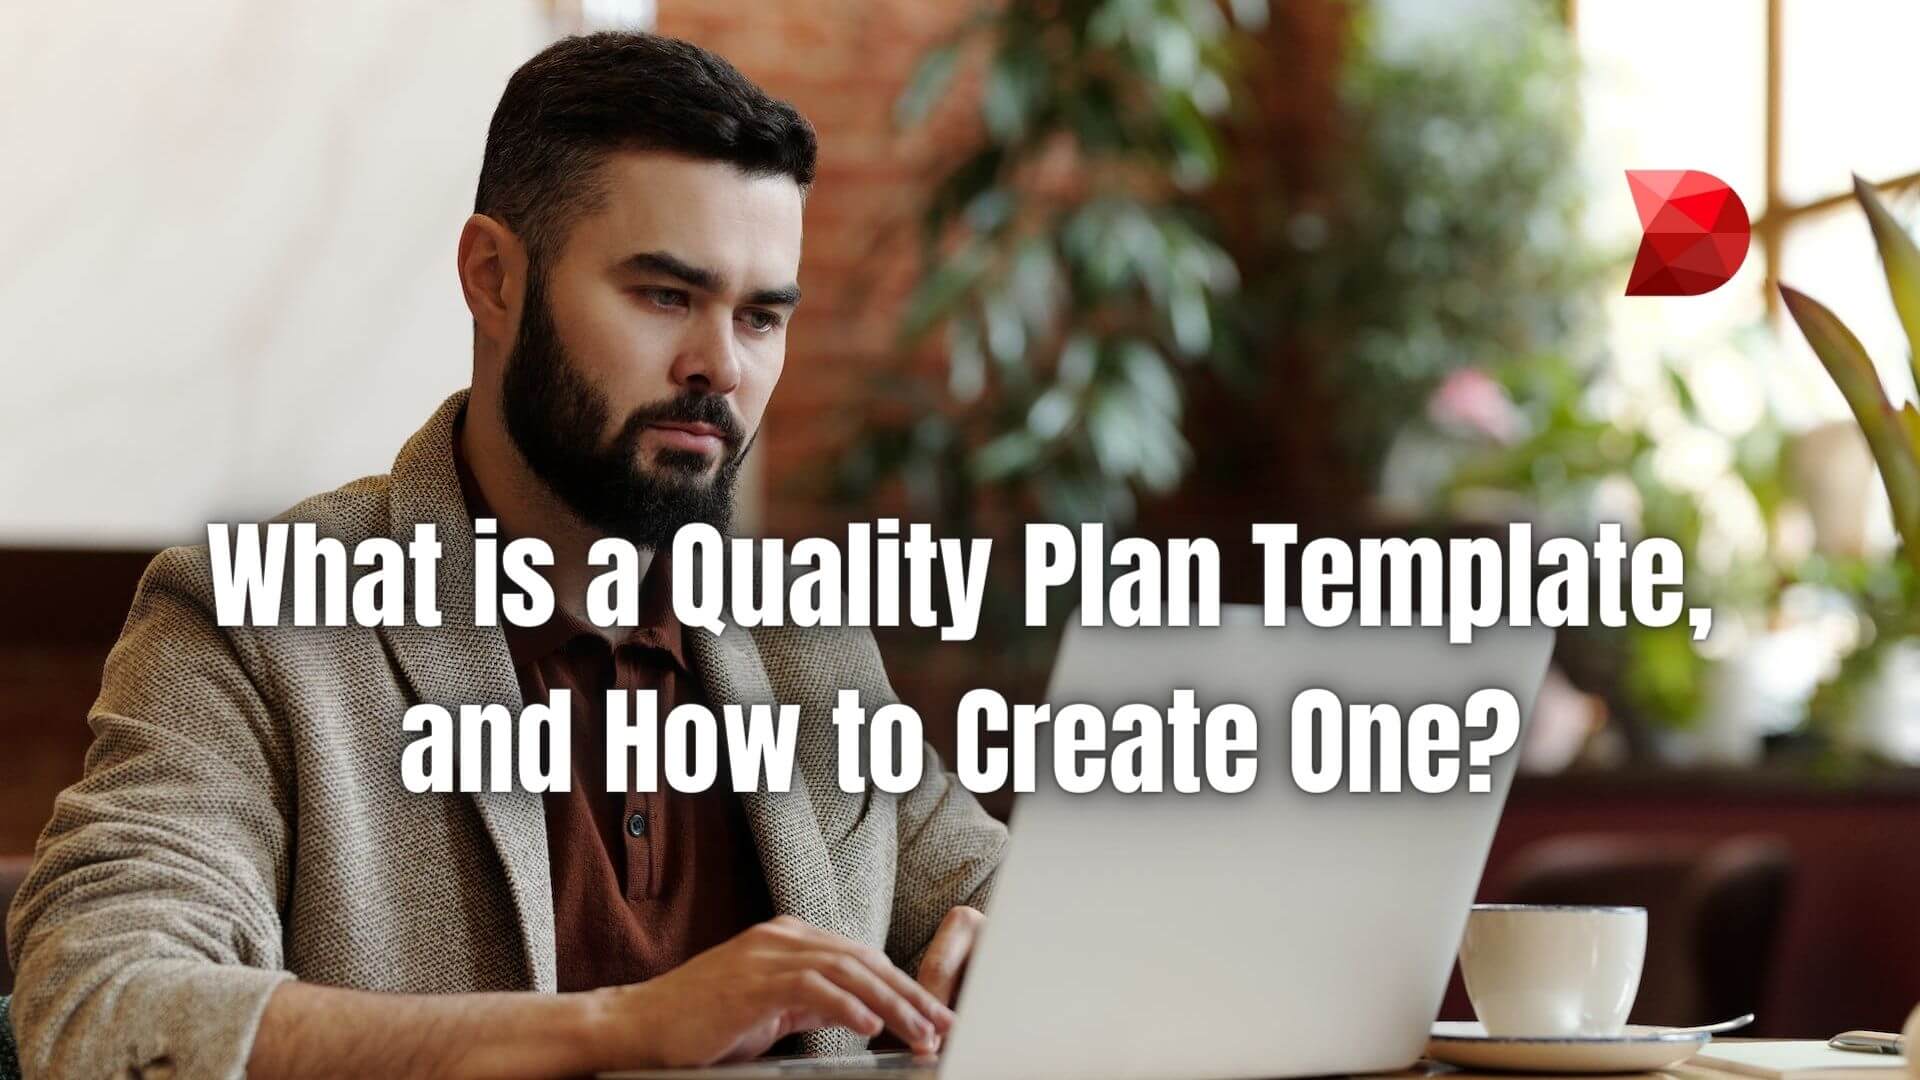 Master quality planning with our comprehensive guide! Click here to discover the key elements and steps to creating a successful template.